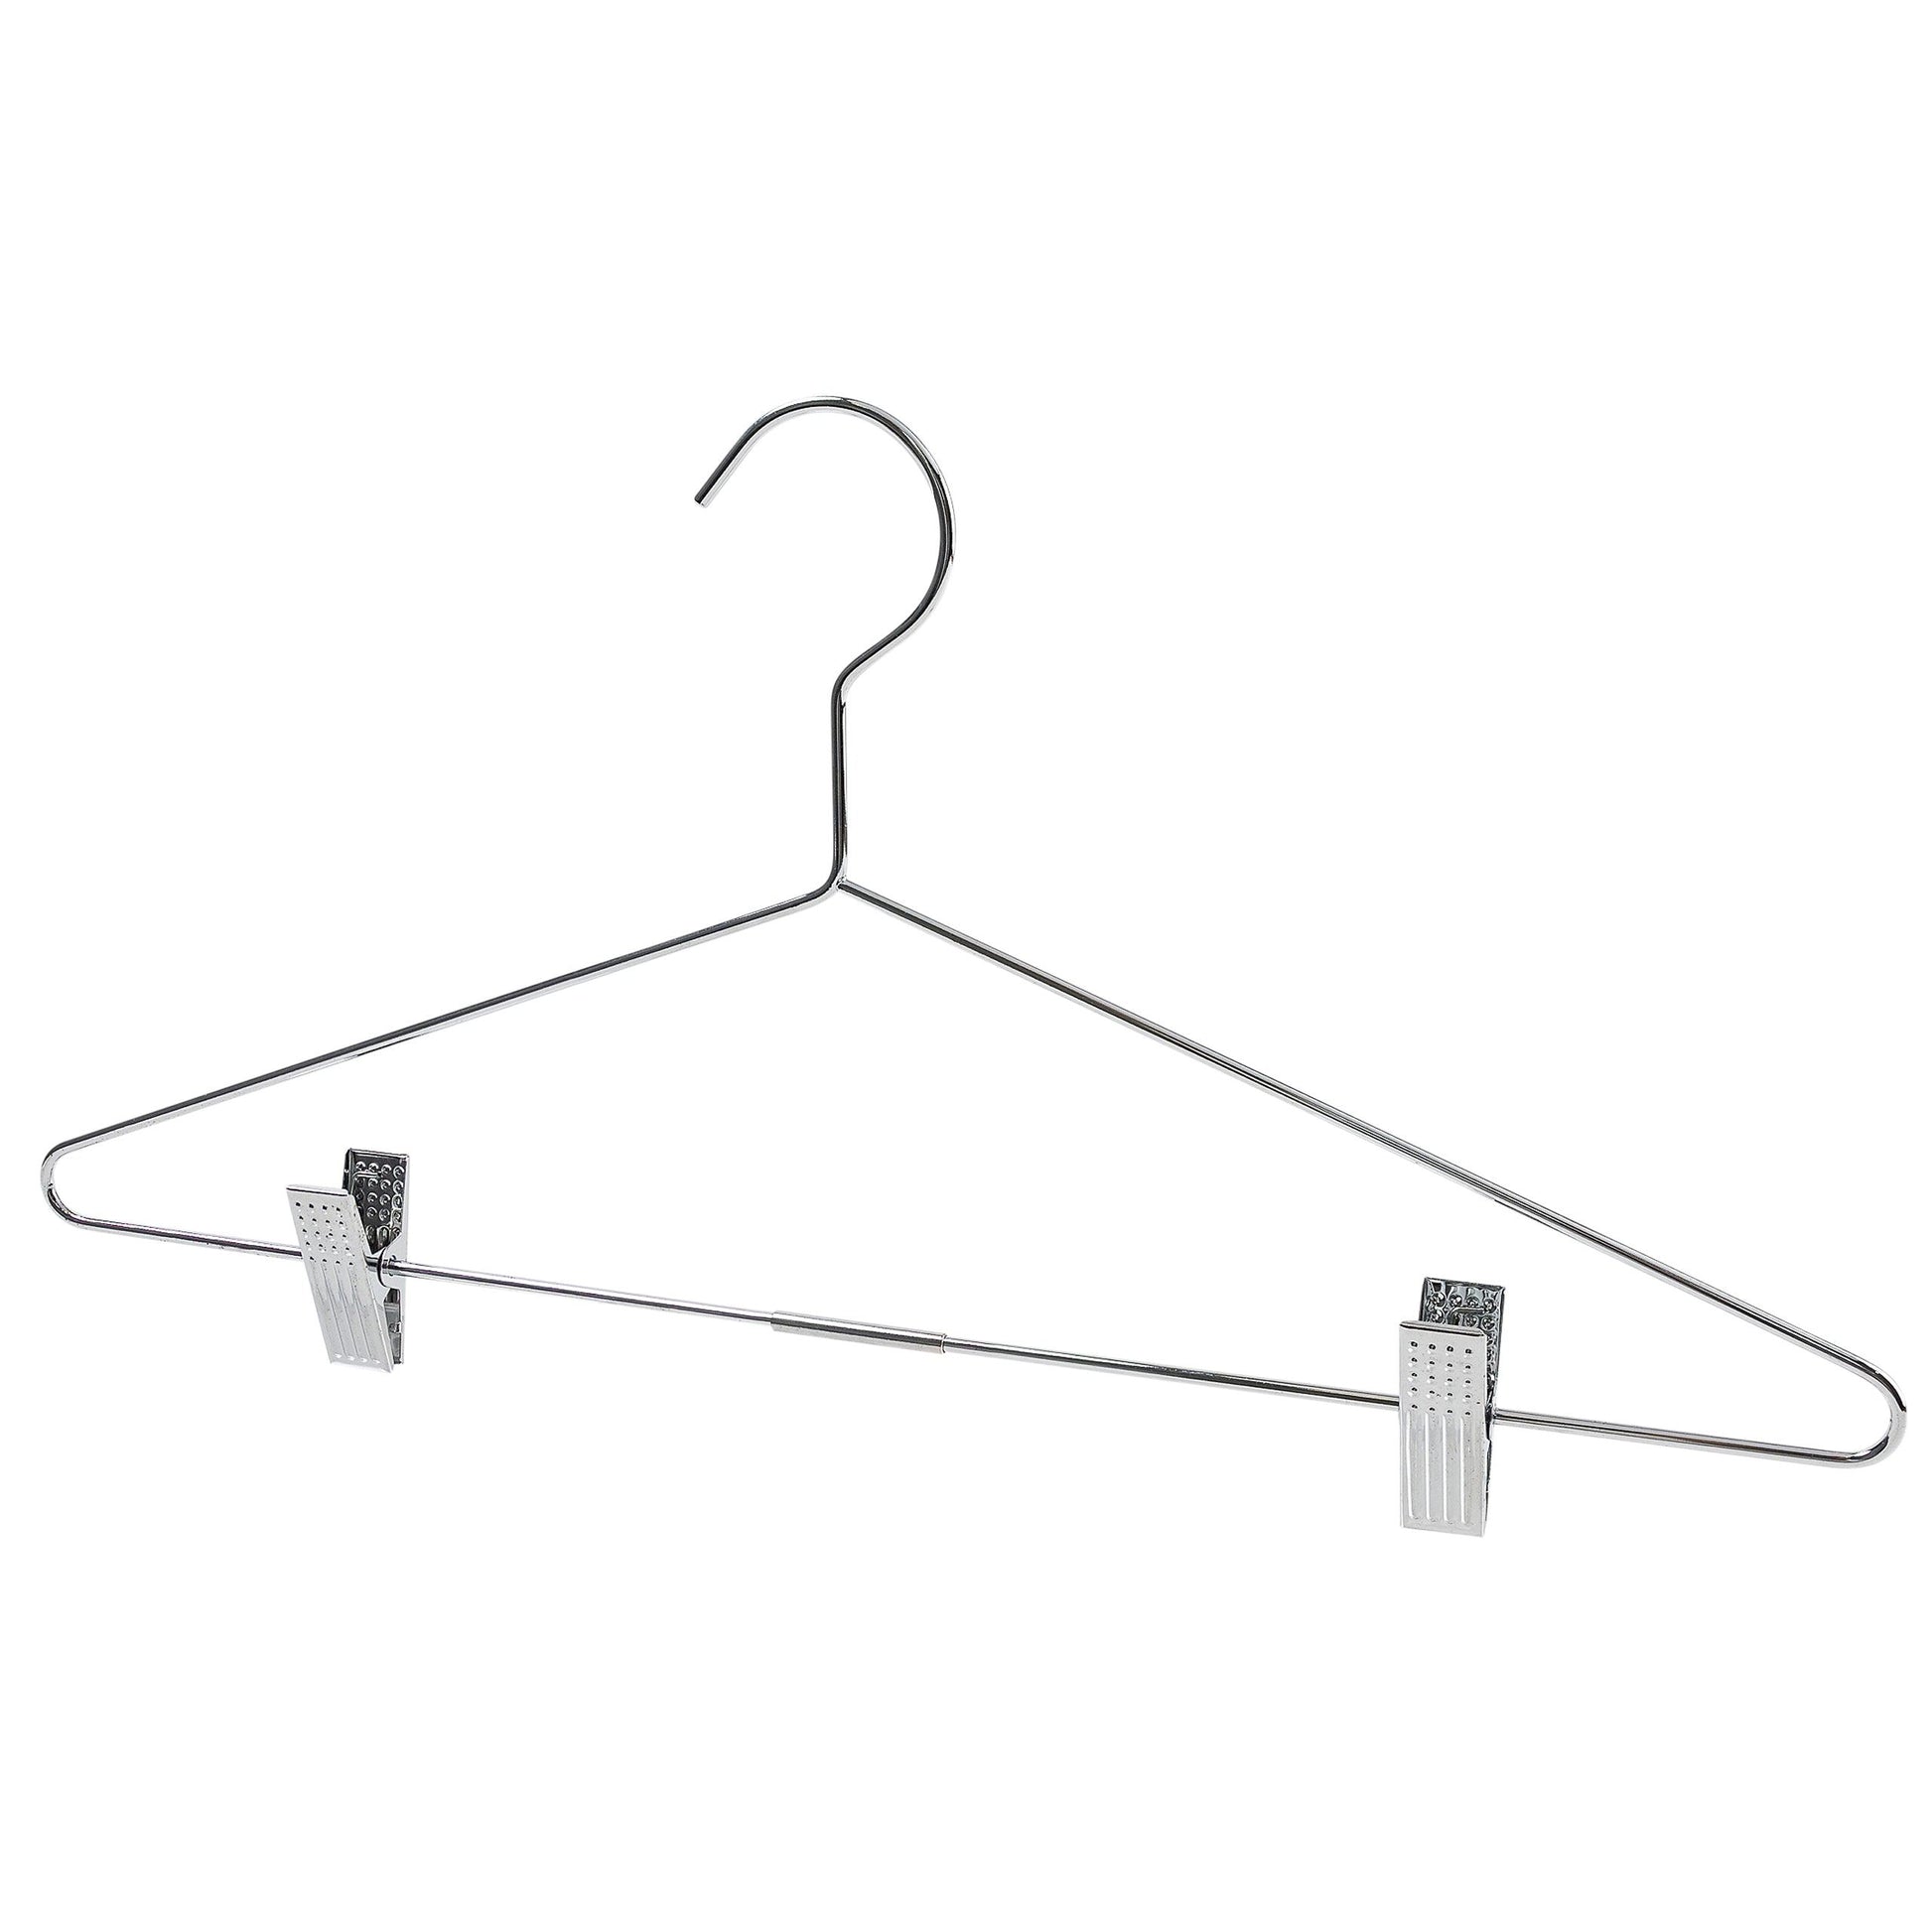 Metal Clothes Hanger With Clips - 43CM X 3.5mm Thick - (Sold in Bundles of 25/50/100) - Hangersforless